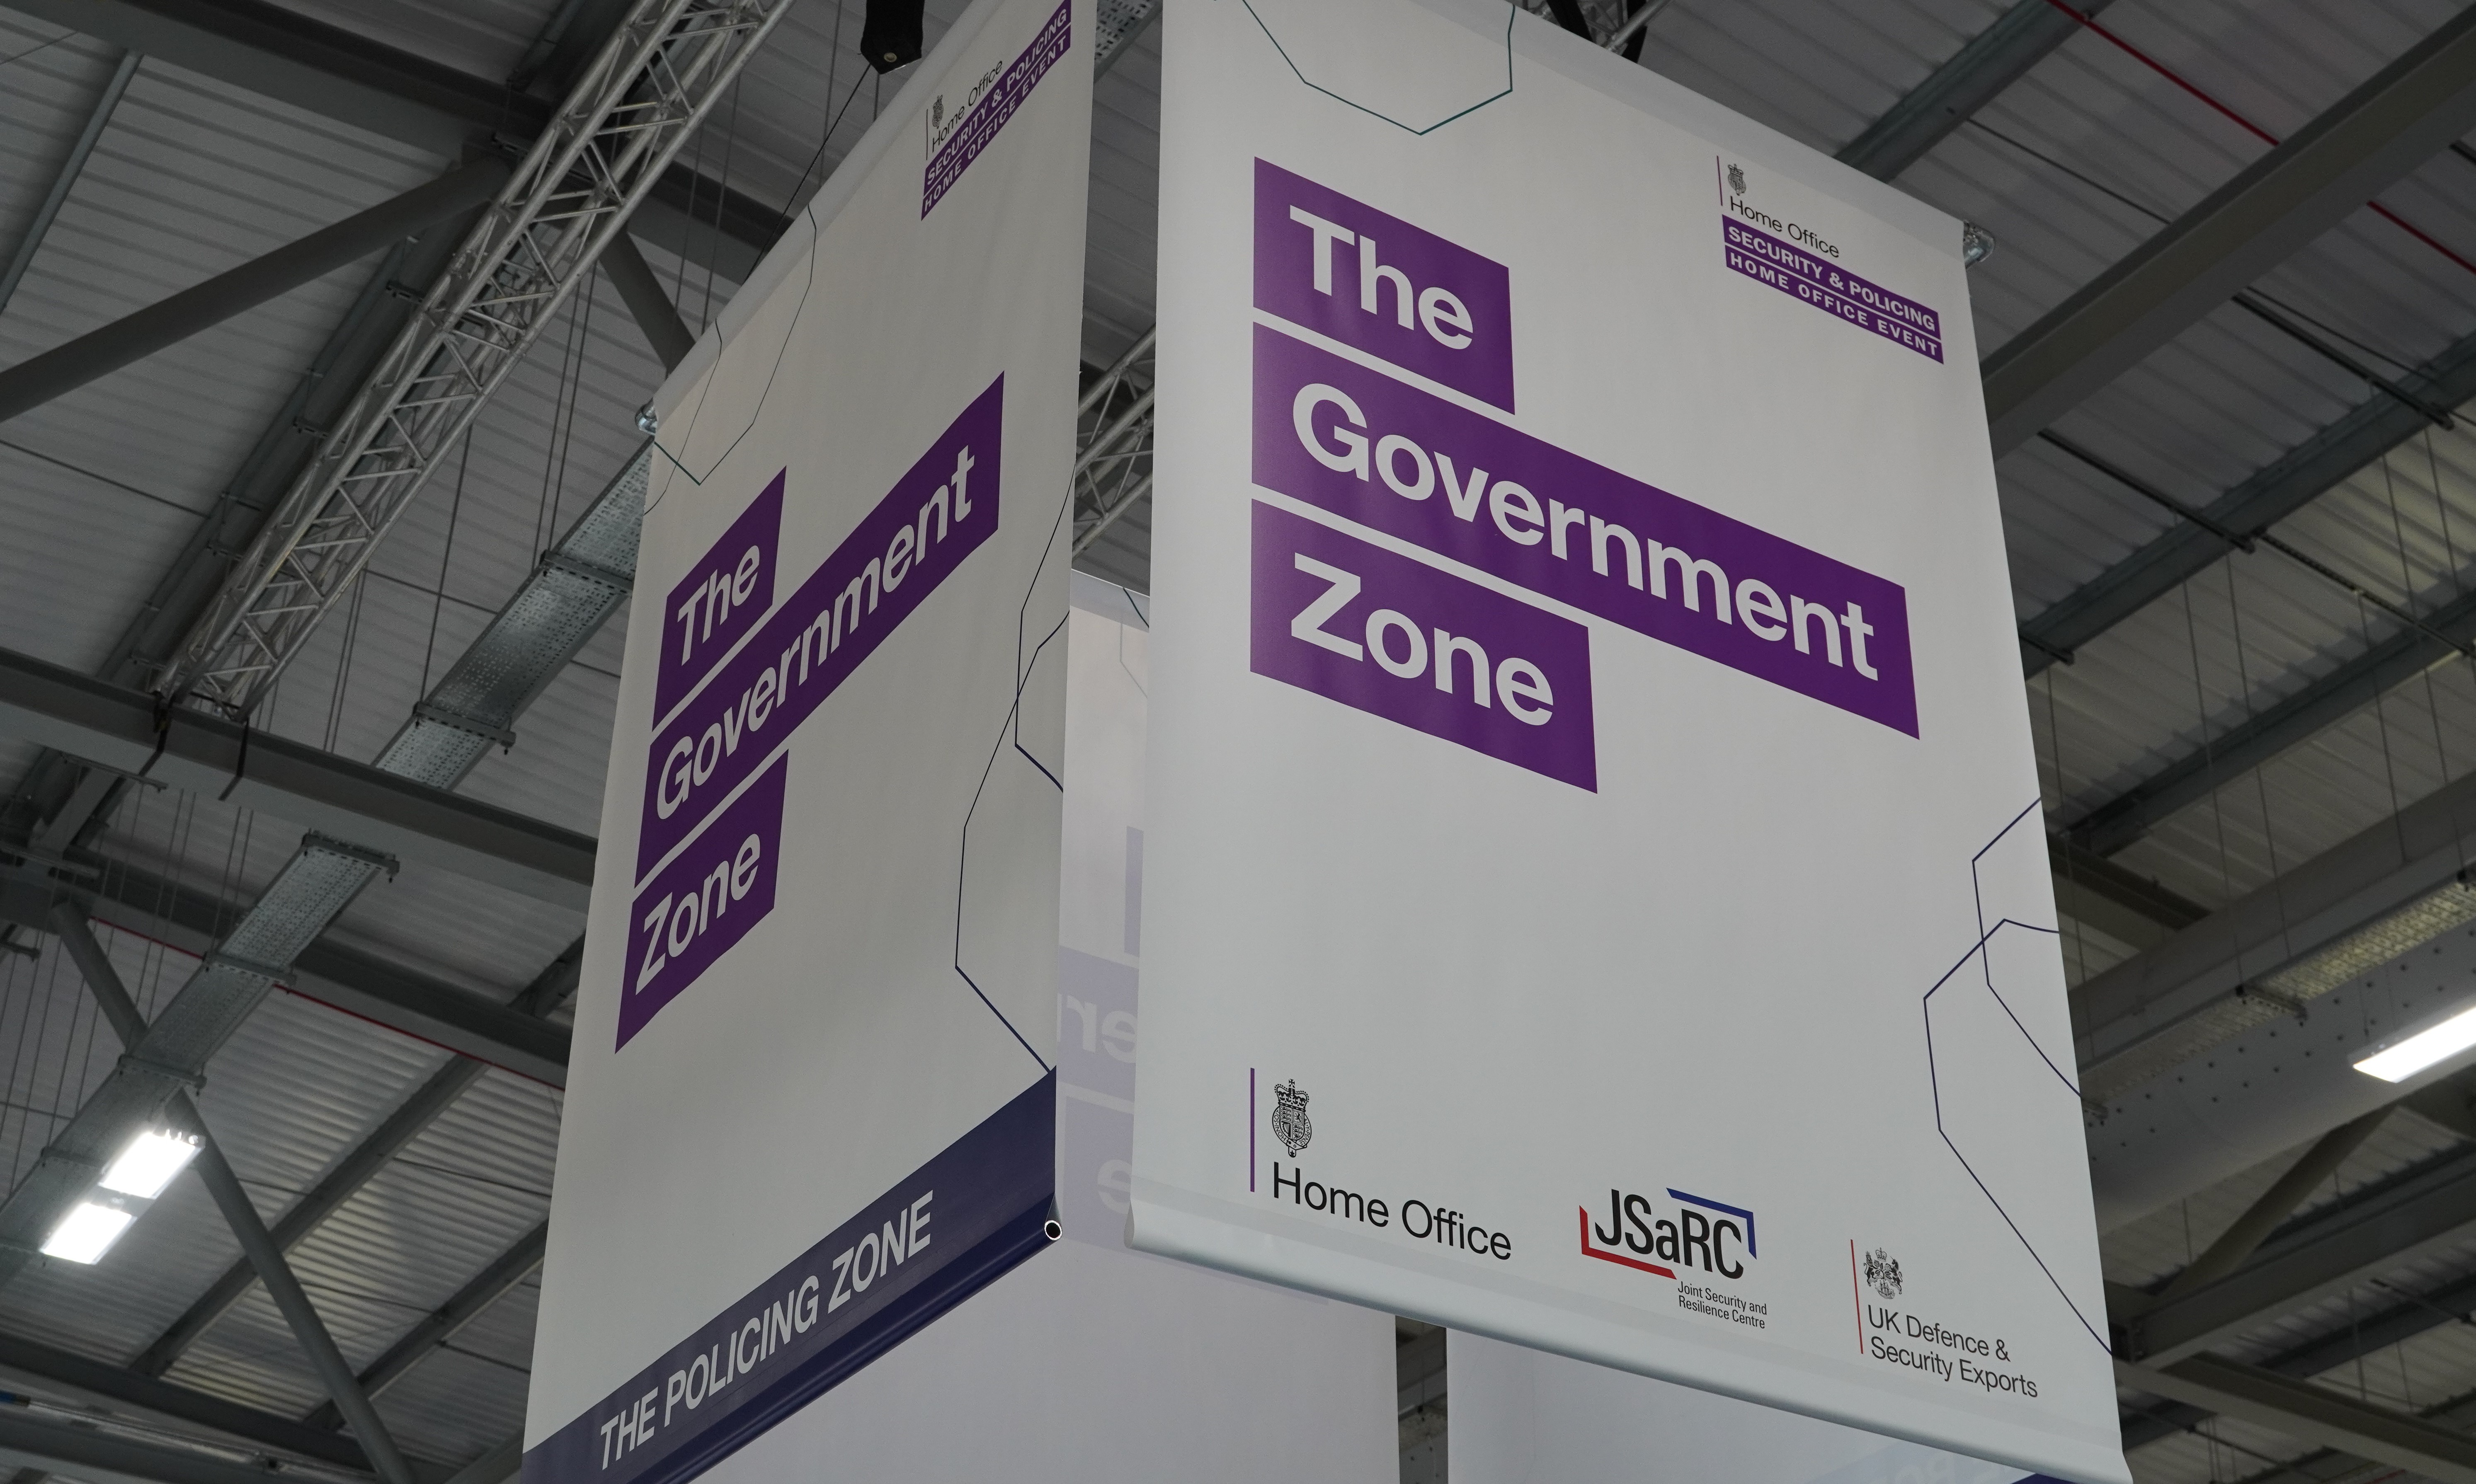 Government zone sign 